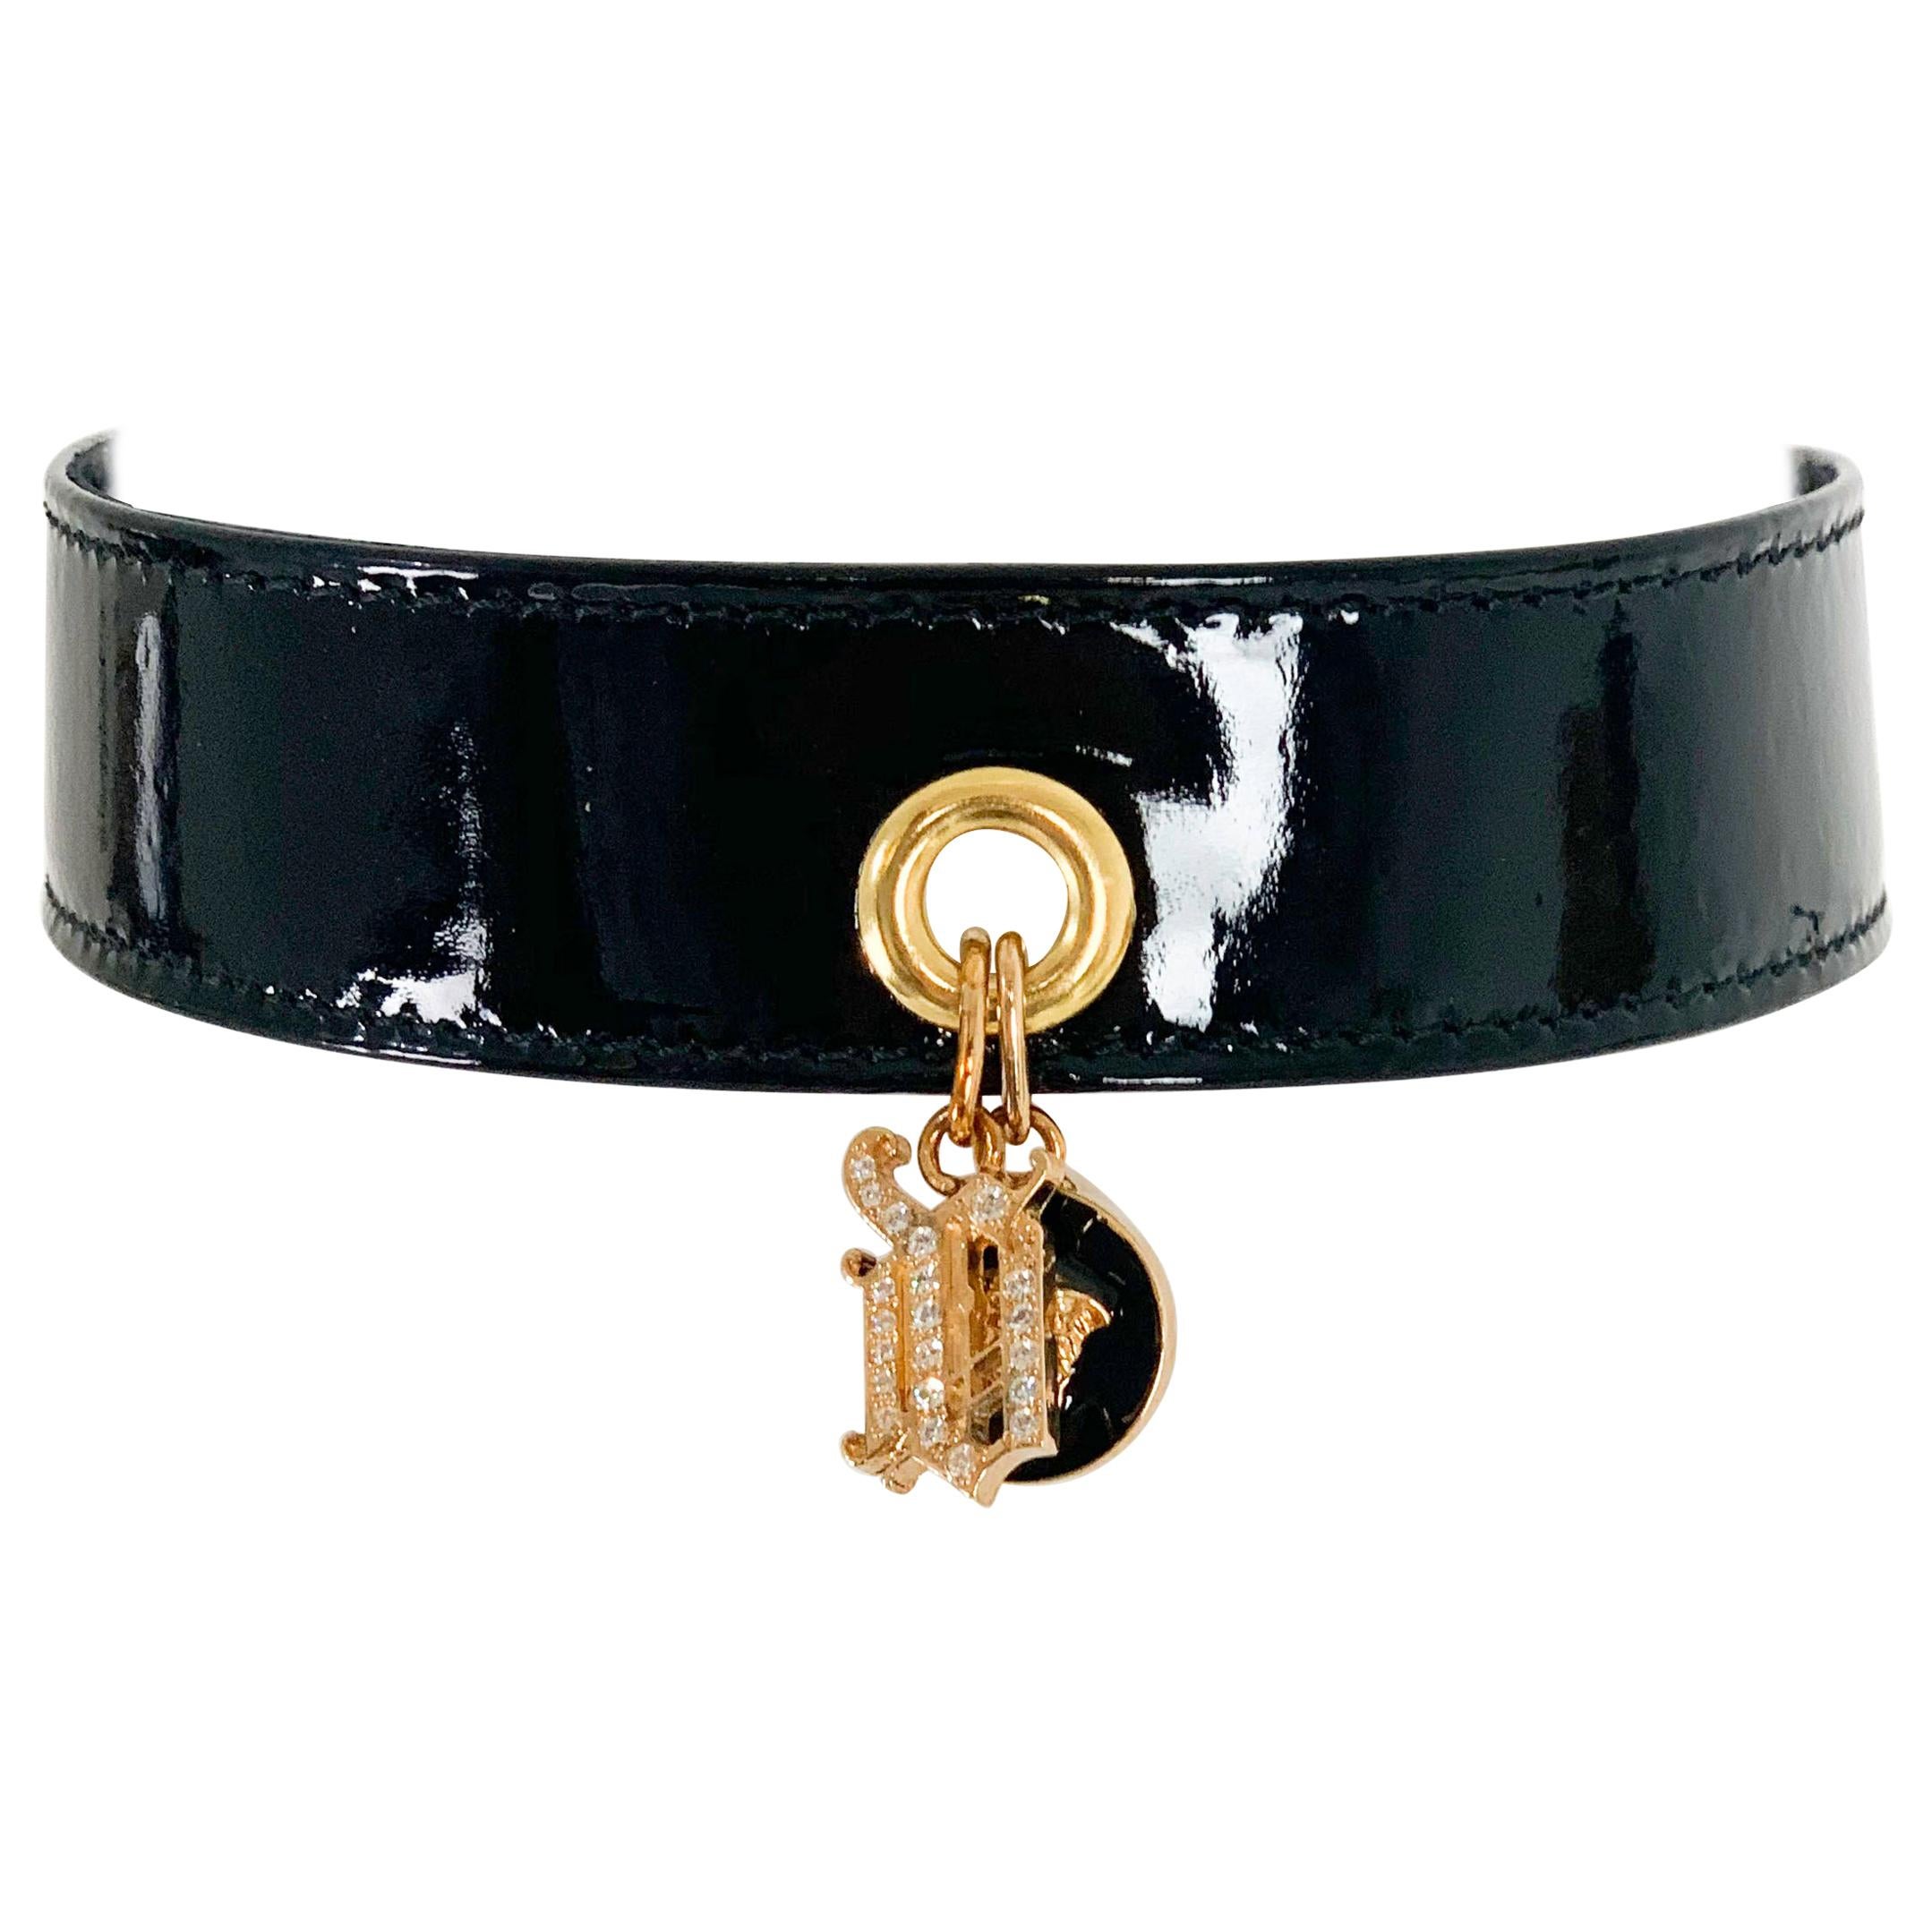 Gianni Versace 1990's Black Choker necklace at 1stDibs